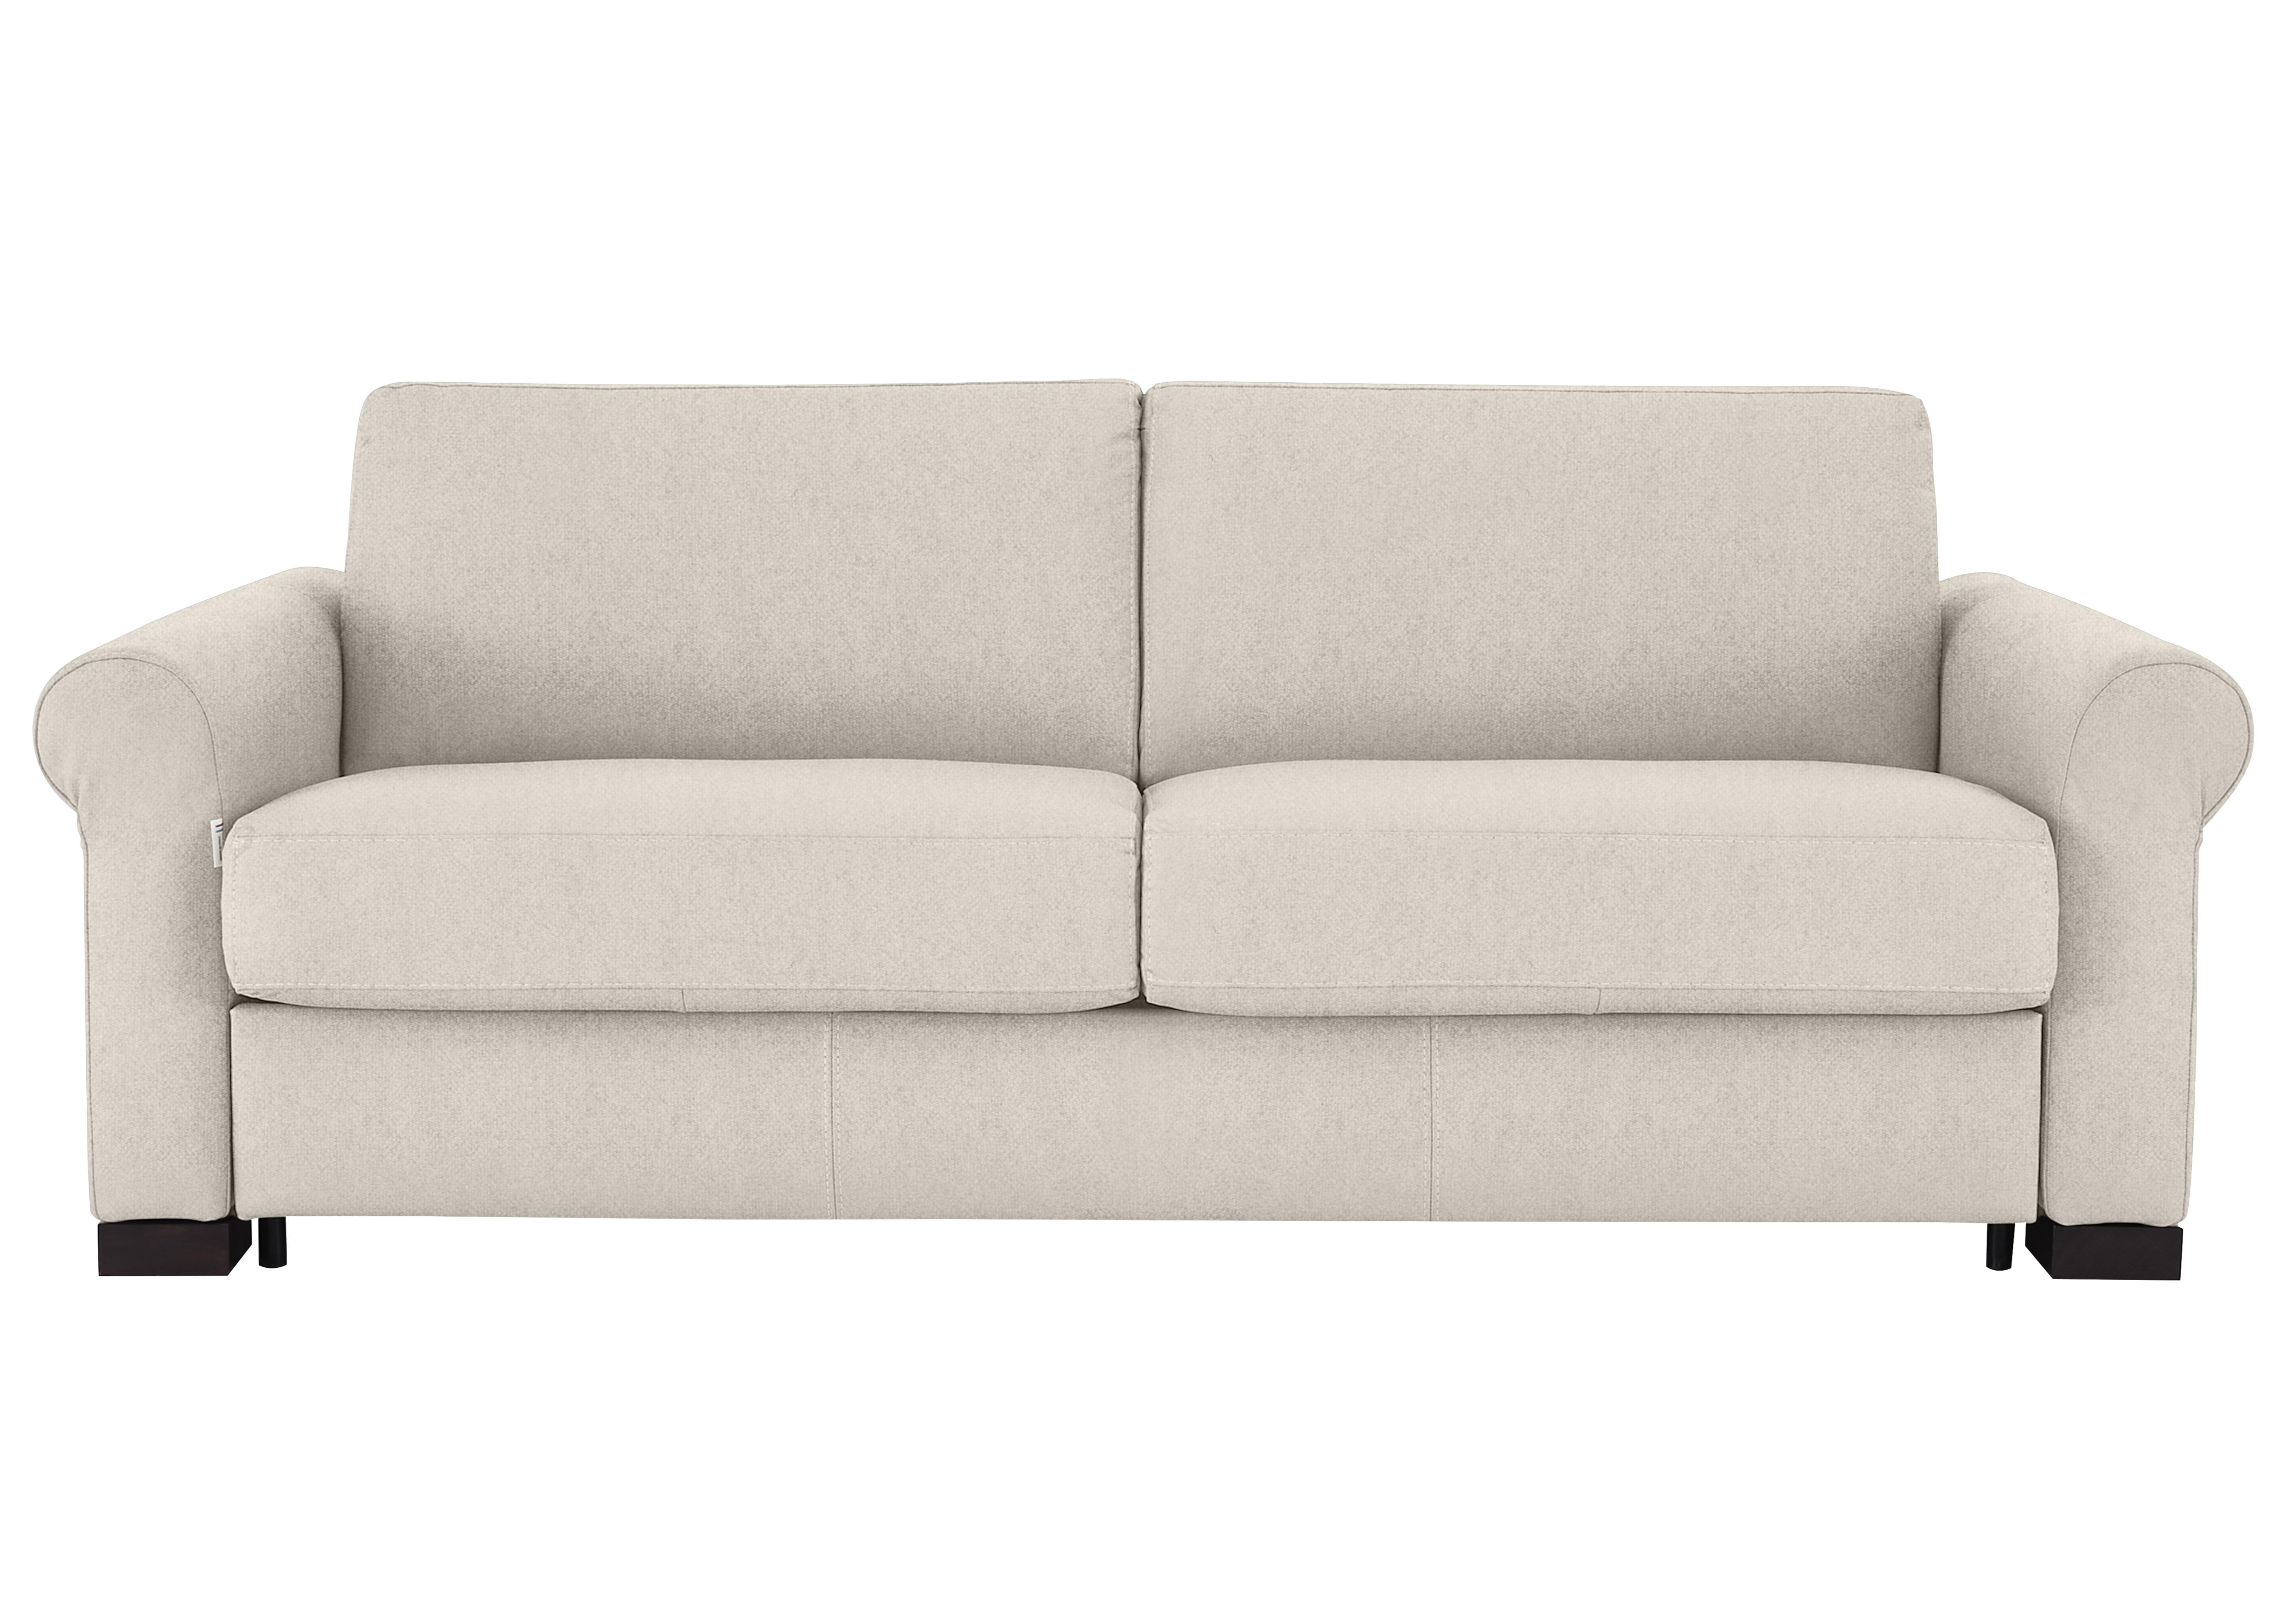 Alcova 3 Seater Fabric Sofa Bed with Scroll Arms in Fuente Beige on Furniture Village